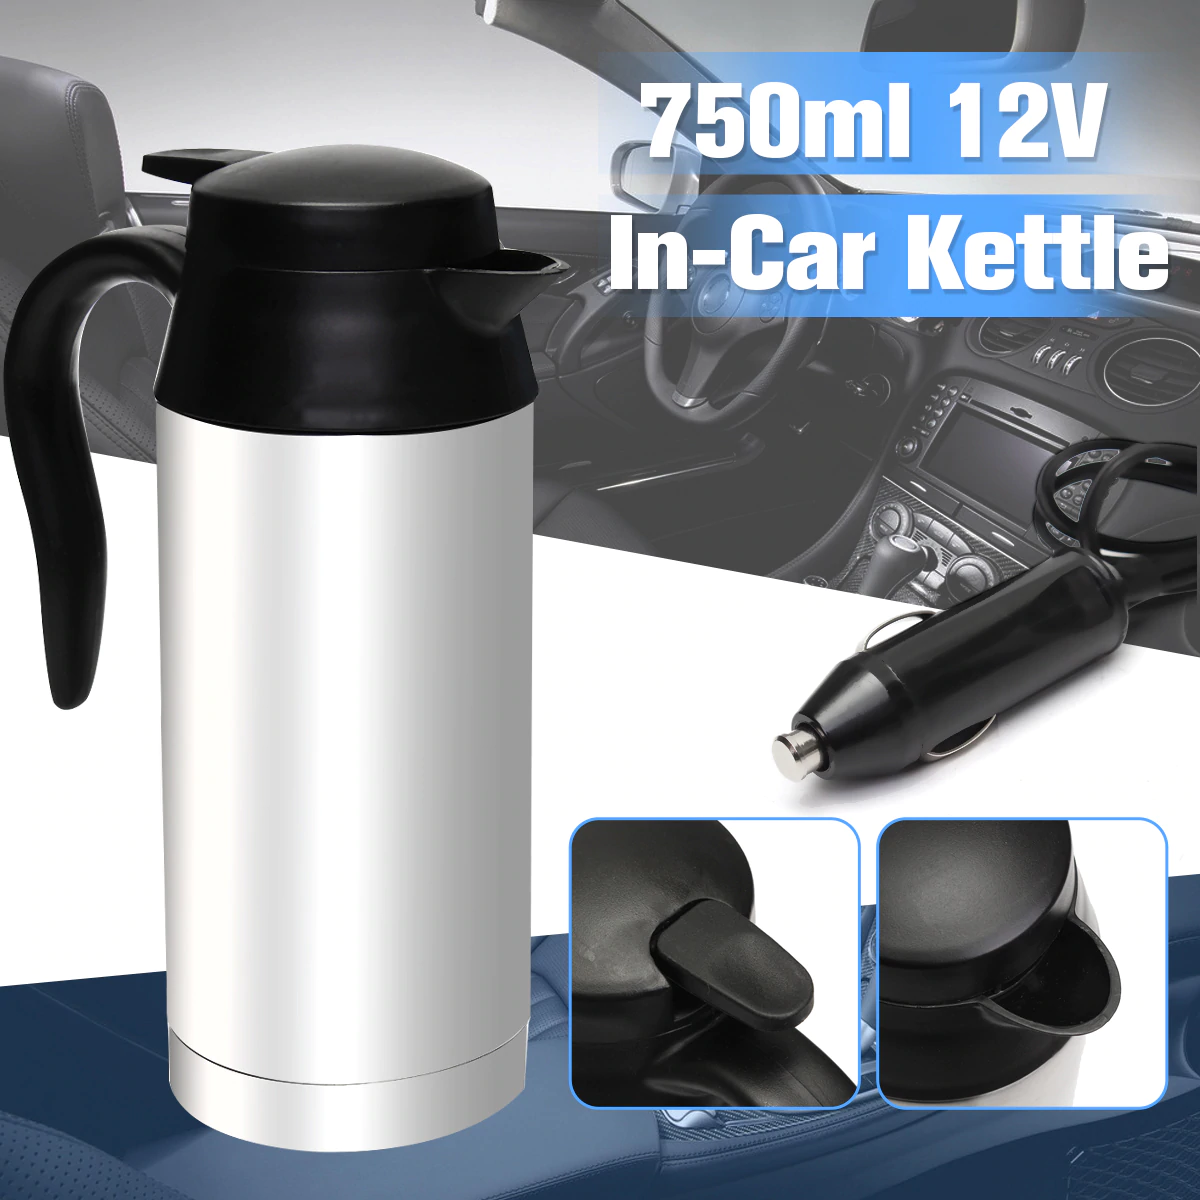 Stainless Steel 12V Electric Kettle 750ml In-Car Travel